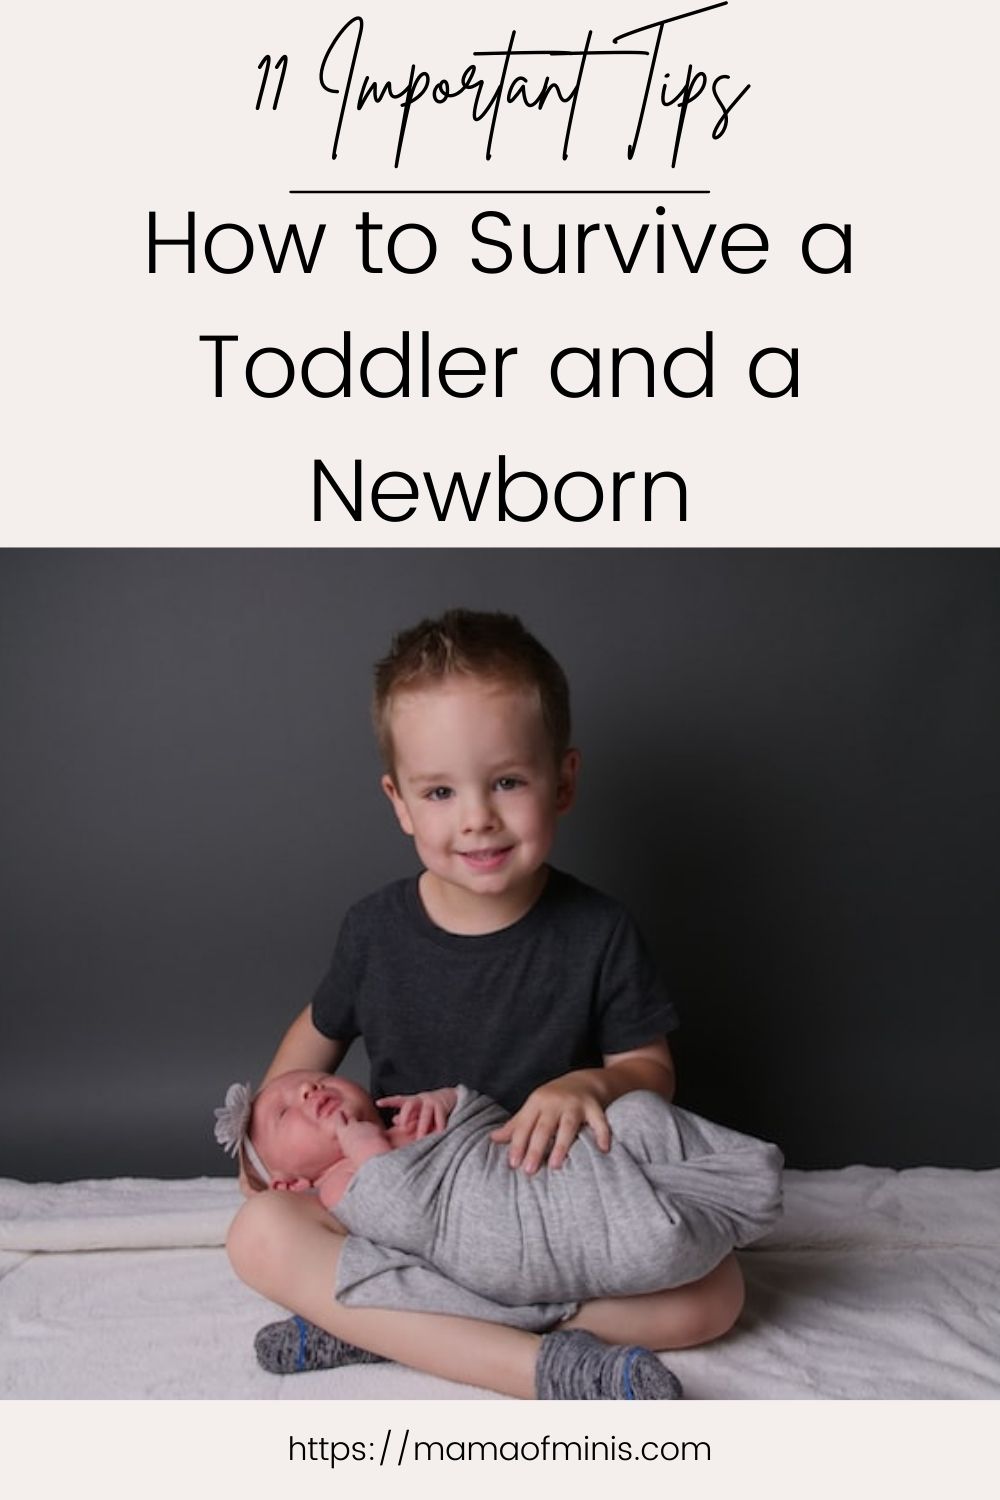 Tips to Survive a Toddler and Newborn Pin